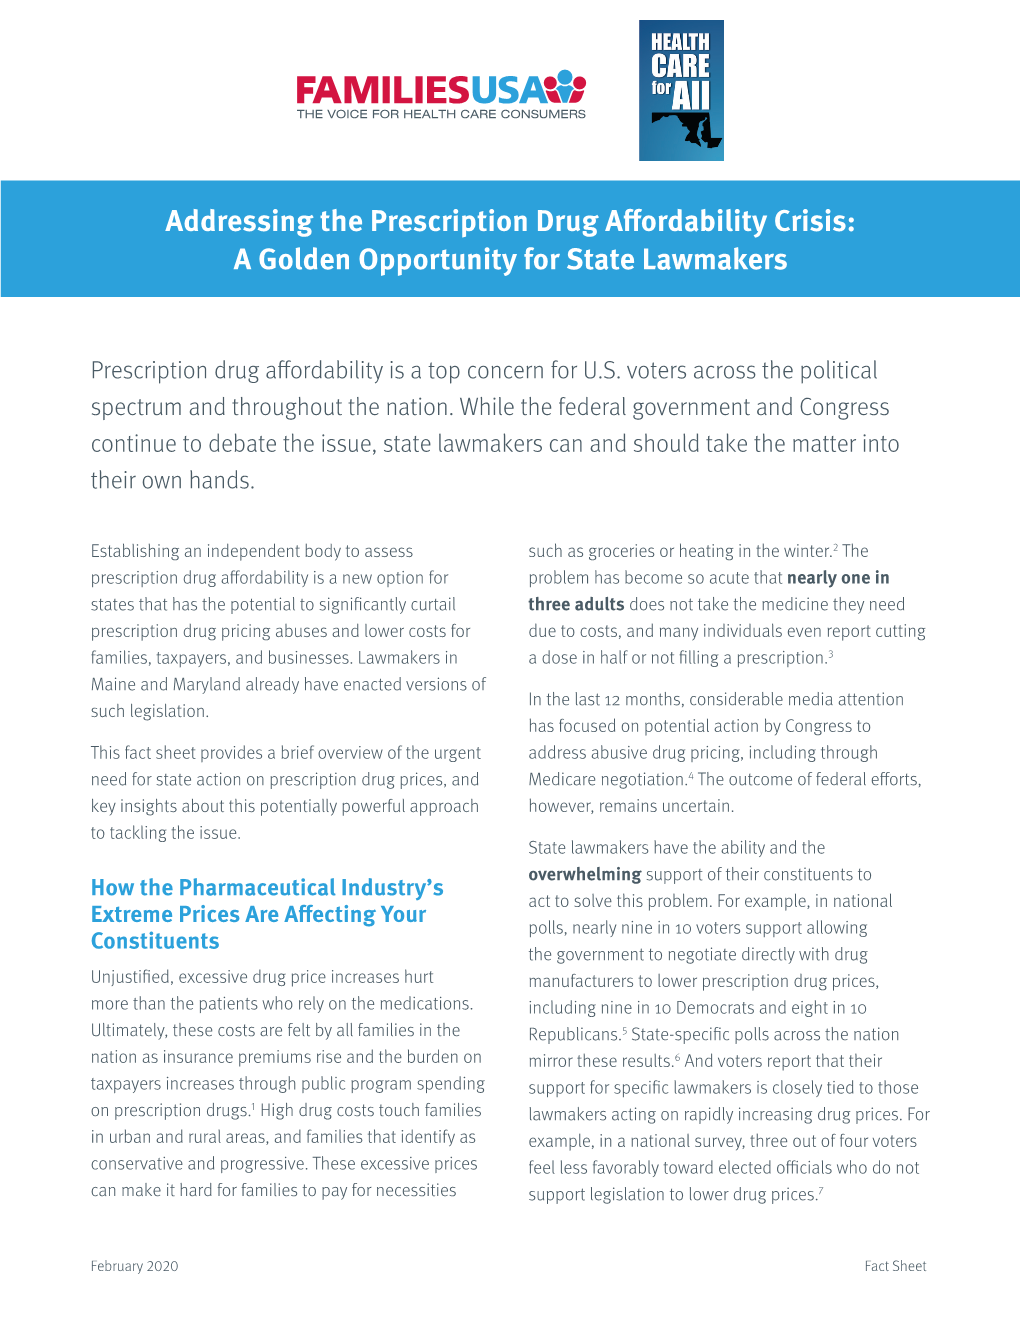 Addressing the Prescription Drug Affordability Crisis: a Golden Opportunity for State Lawmakers